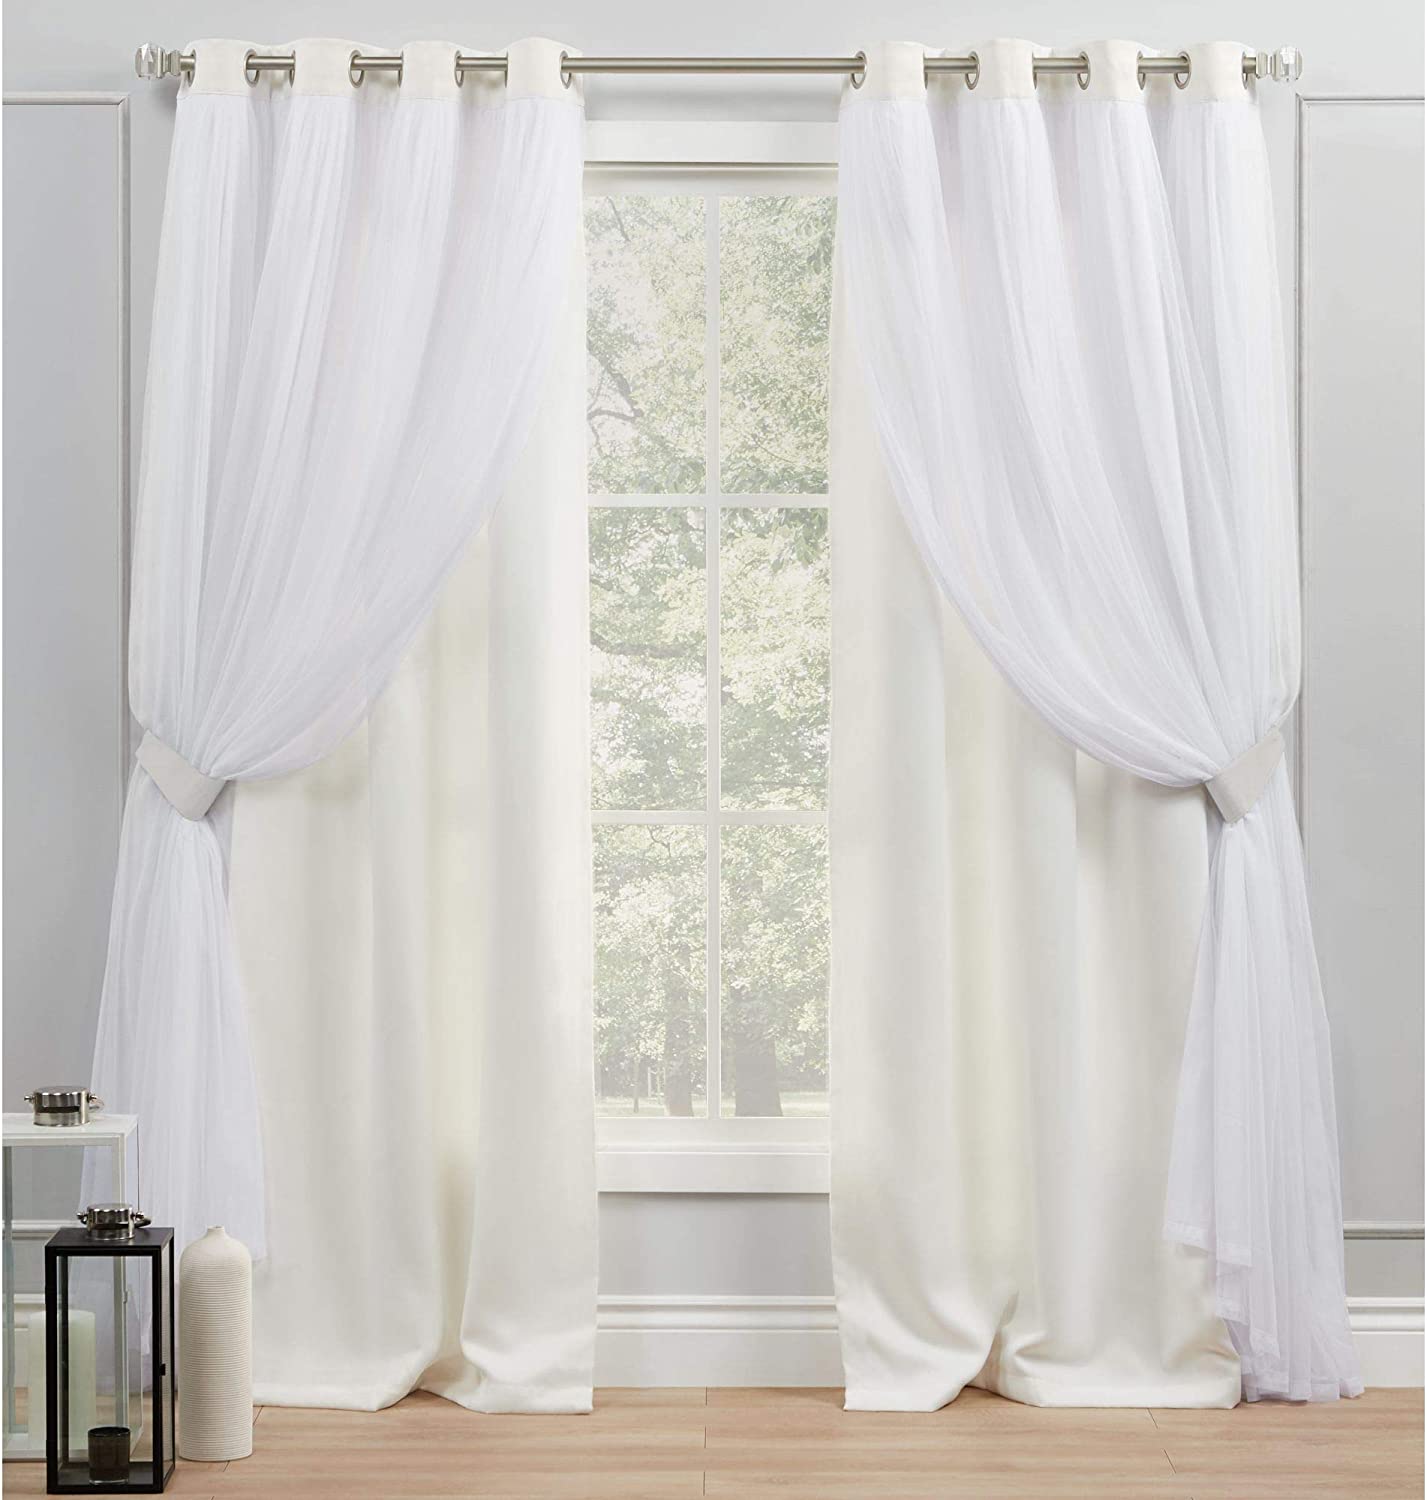 Hotel Style Curtains